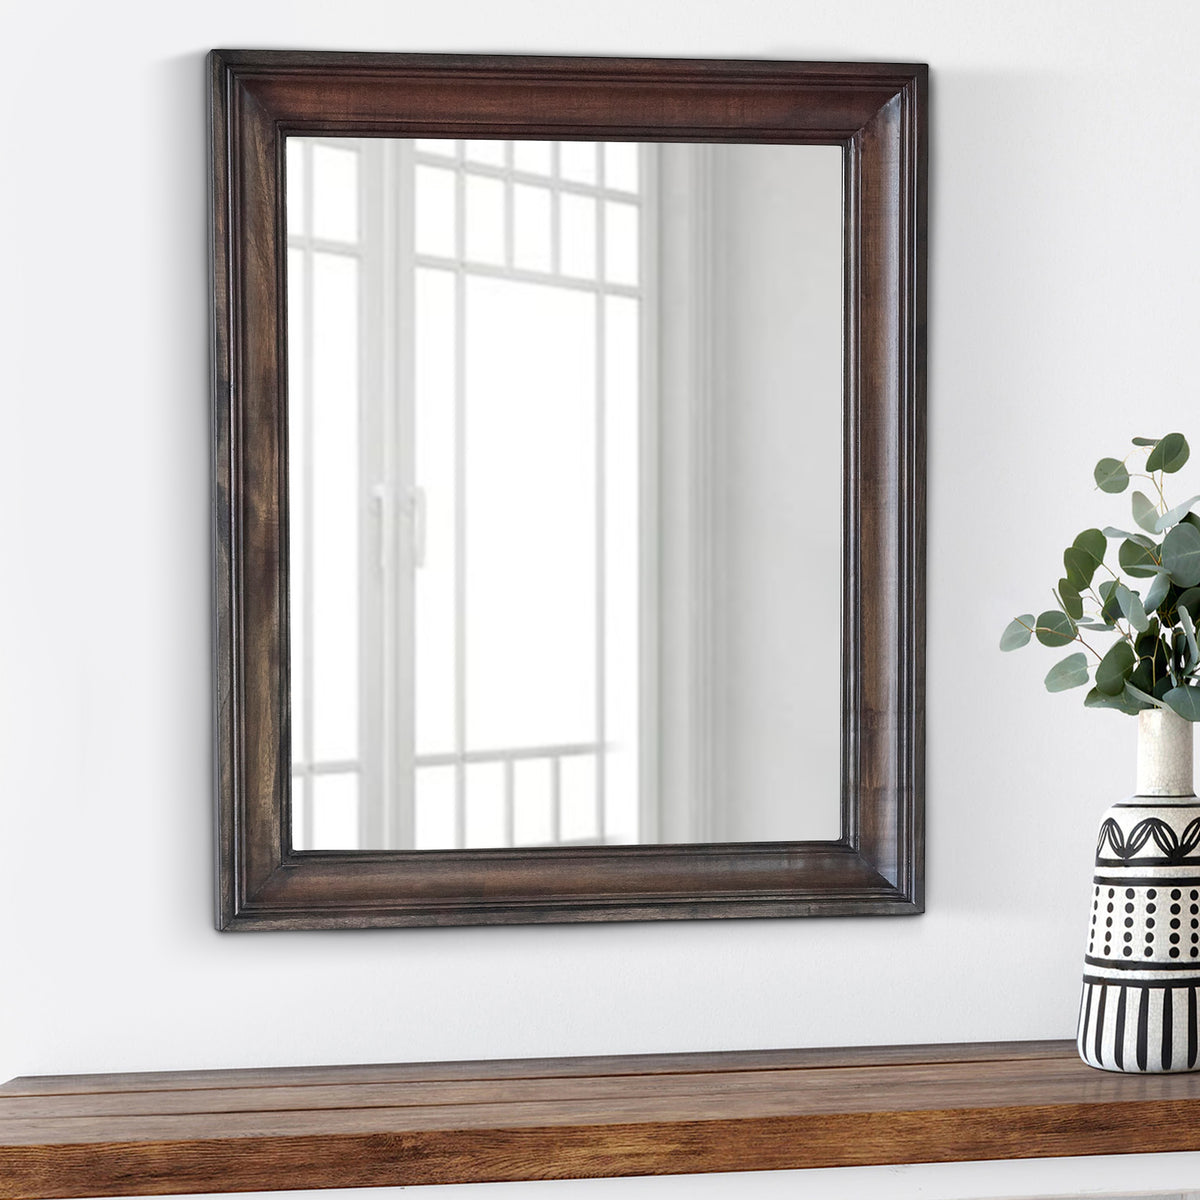 Oxy 38 Inch Classic Rectangular Portrait Mirror with Wood Frame, Brown - BM280362